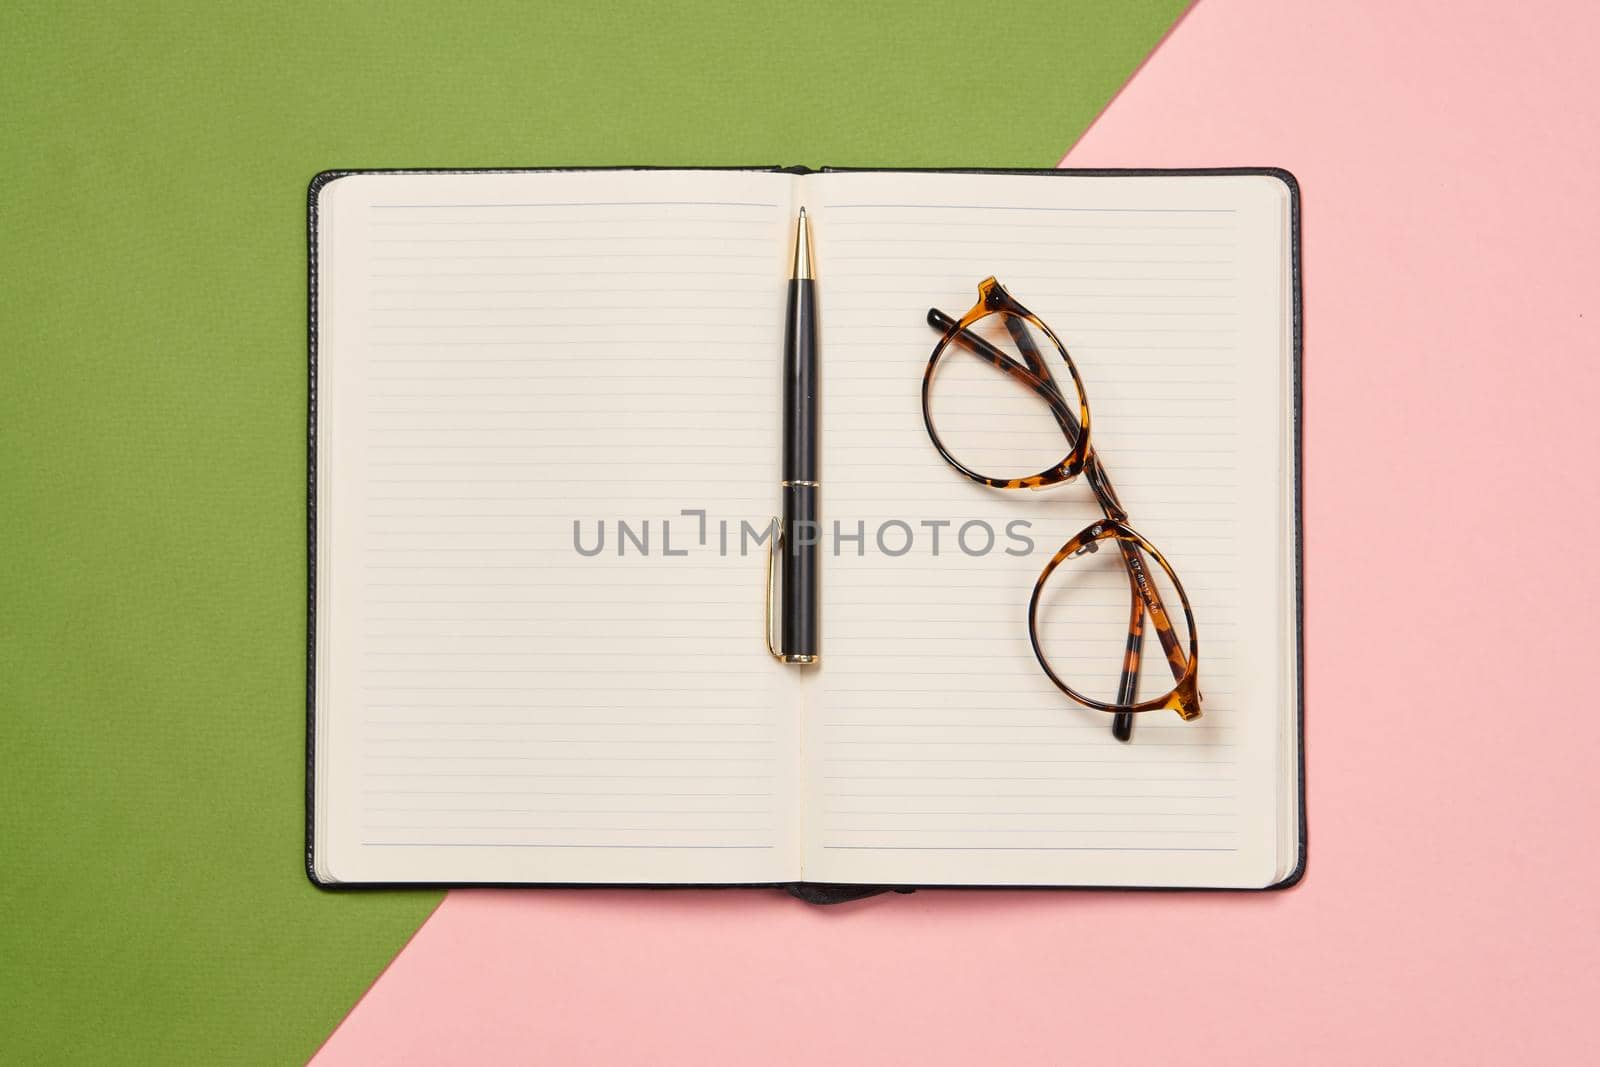 notepad documents office accessories tools business top view. High quality photo